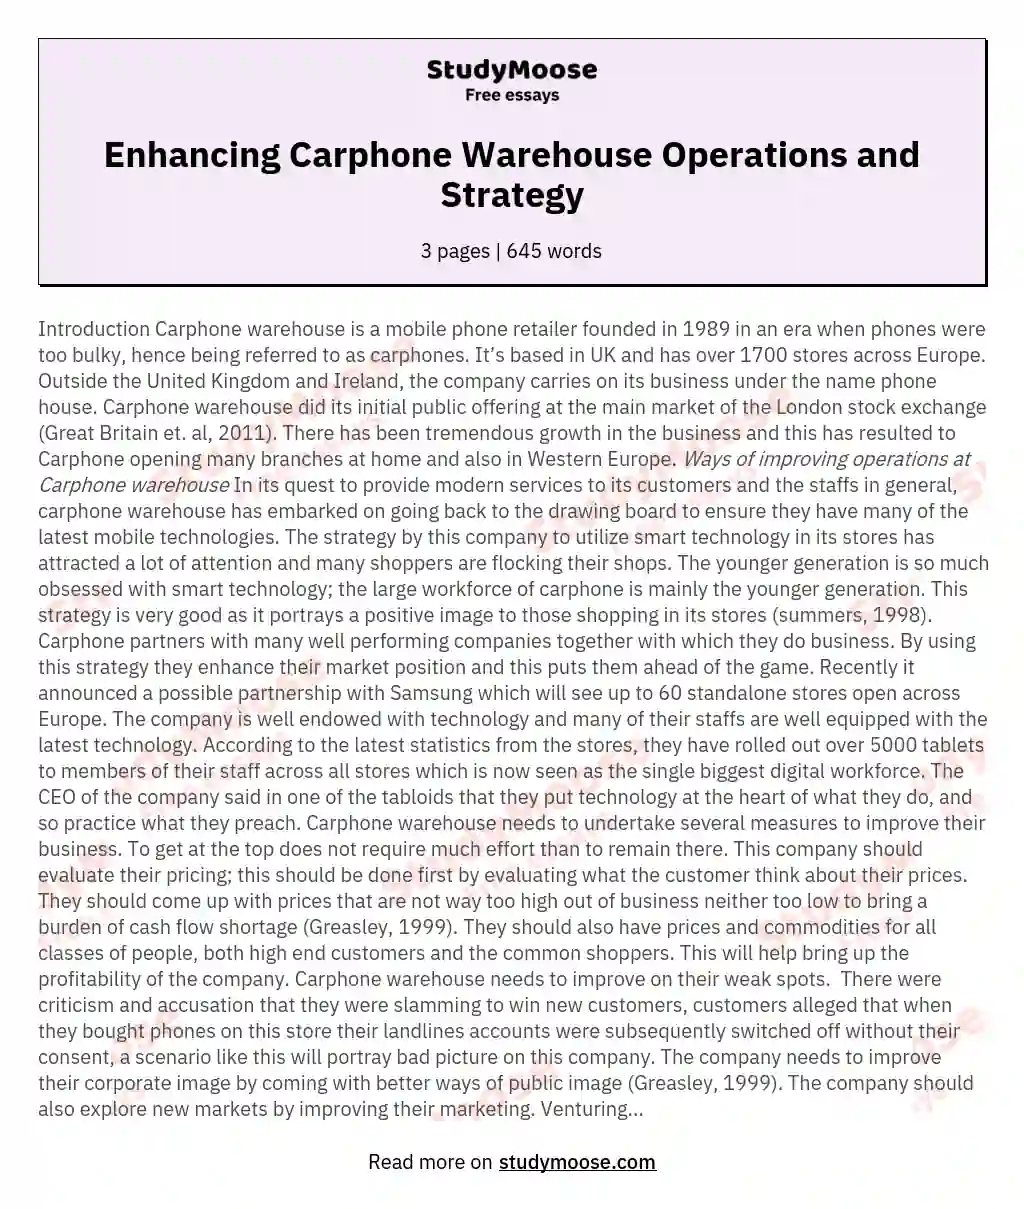 Enhancing Carphone Warehouse Operations and Strategy essay